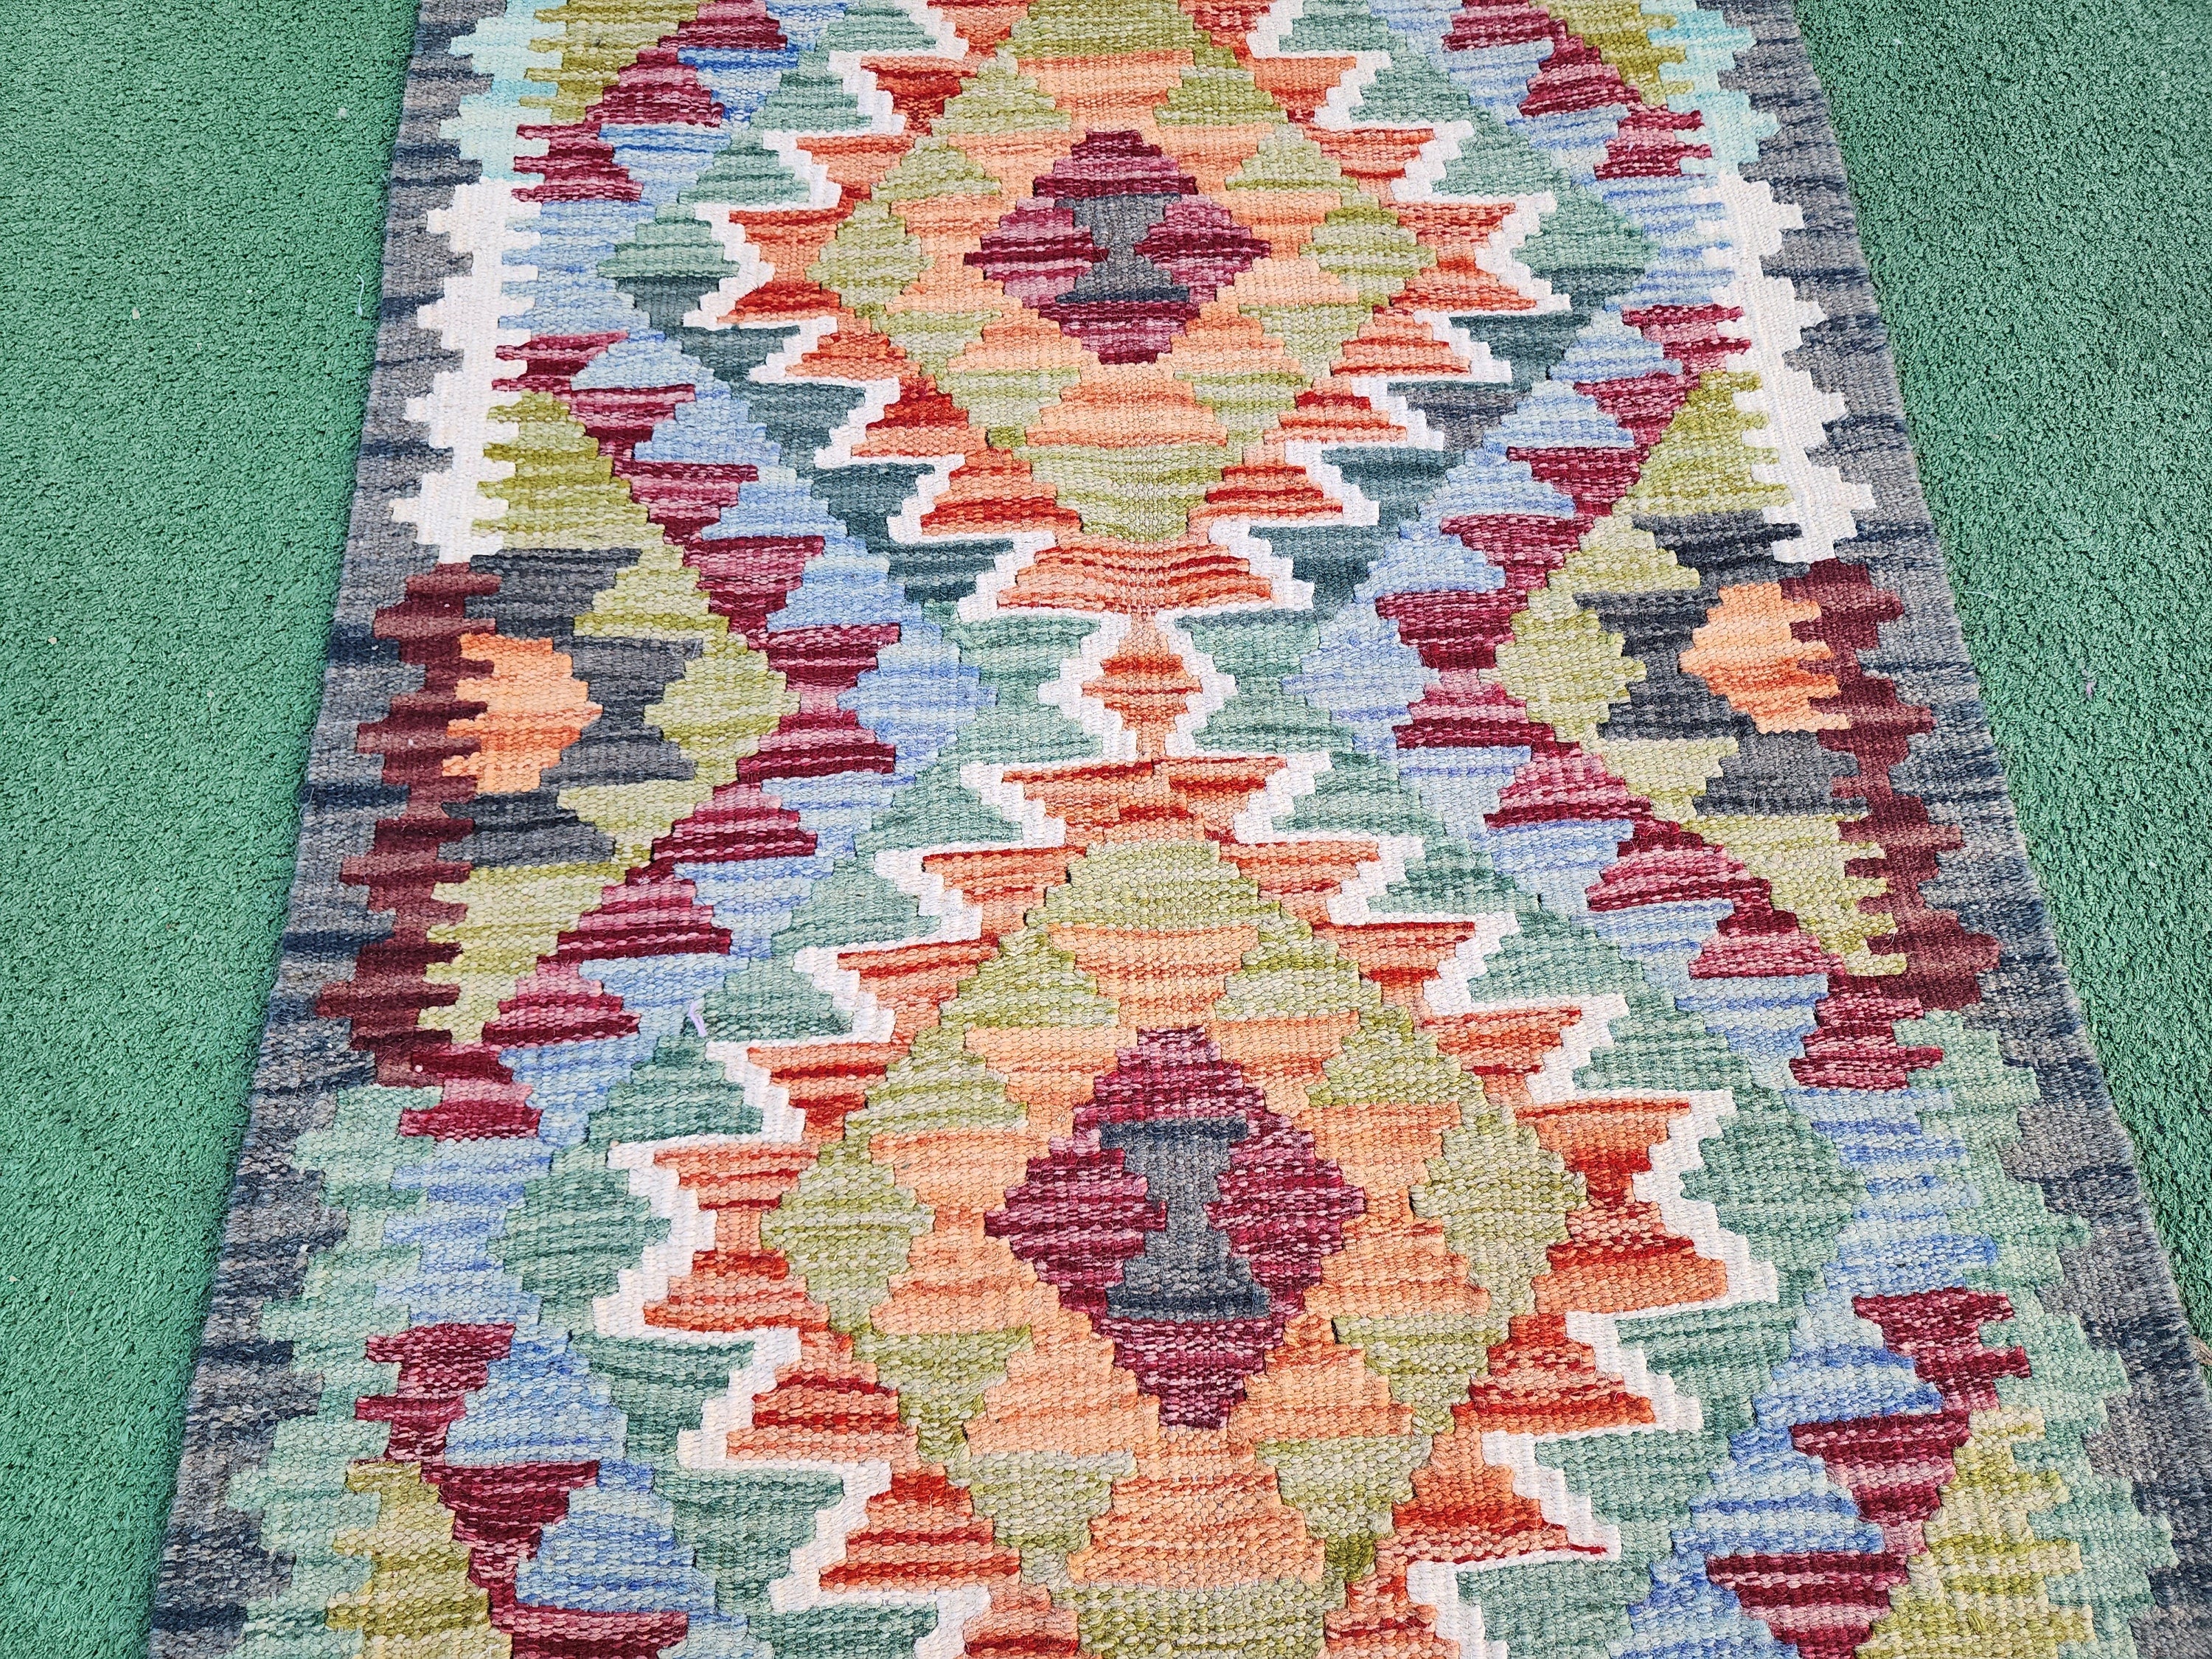 Afghan Kilim Rug 2 ft 9 in x 2 ft, Small Turkish Door Mat A